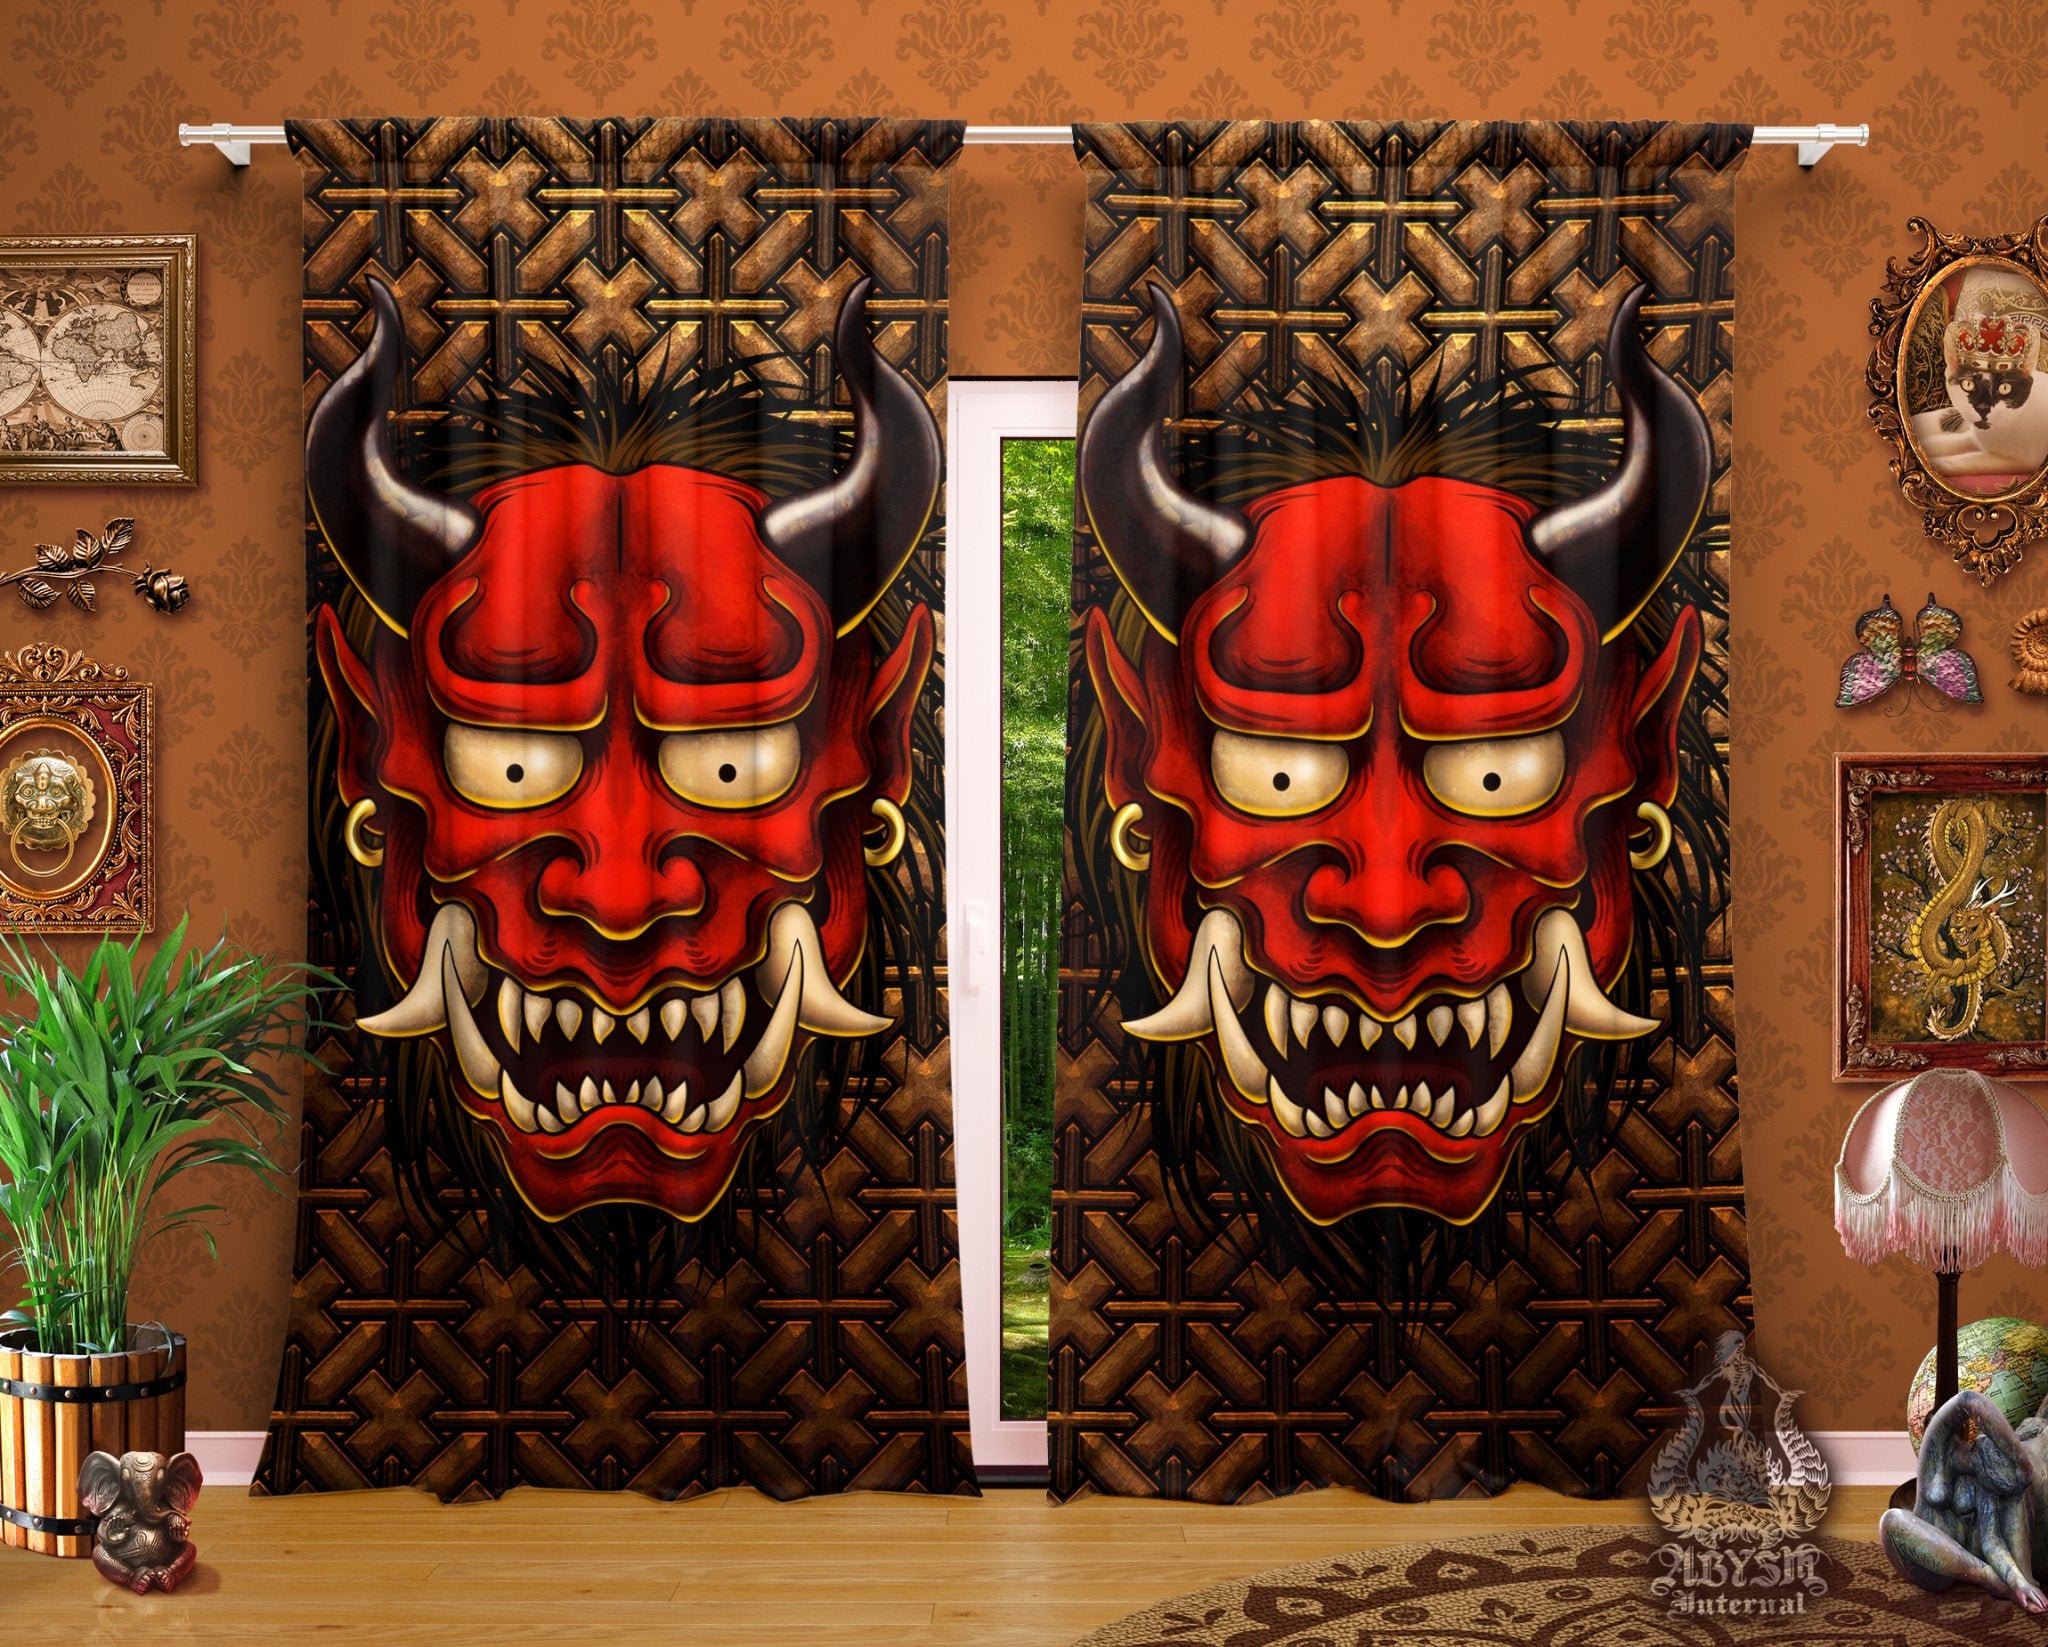 Oni Curtains, 50x84' Printed Window Panels, Japanese Demon, Asian Decor, Art Print - Original White or Red, 2 Colors - Abysm Internal